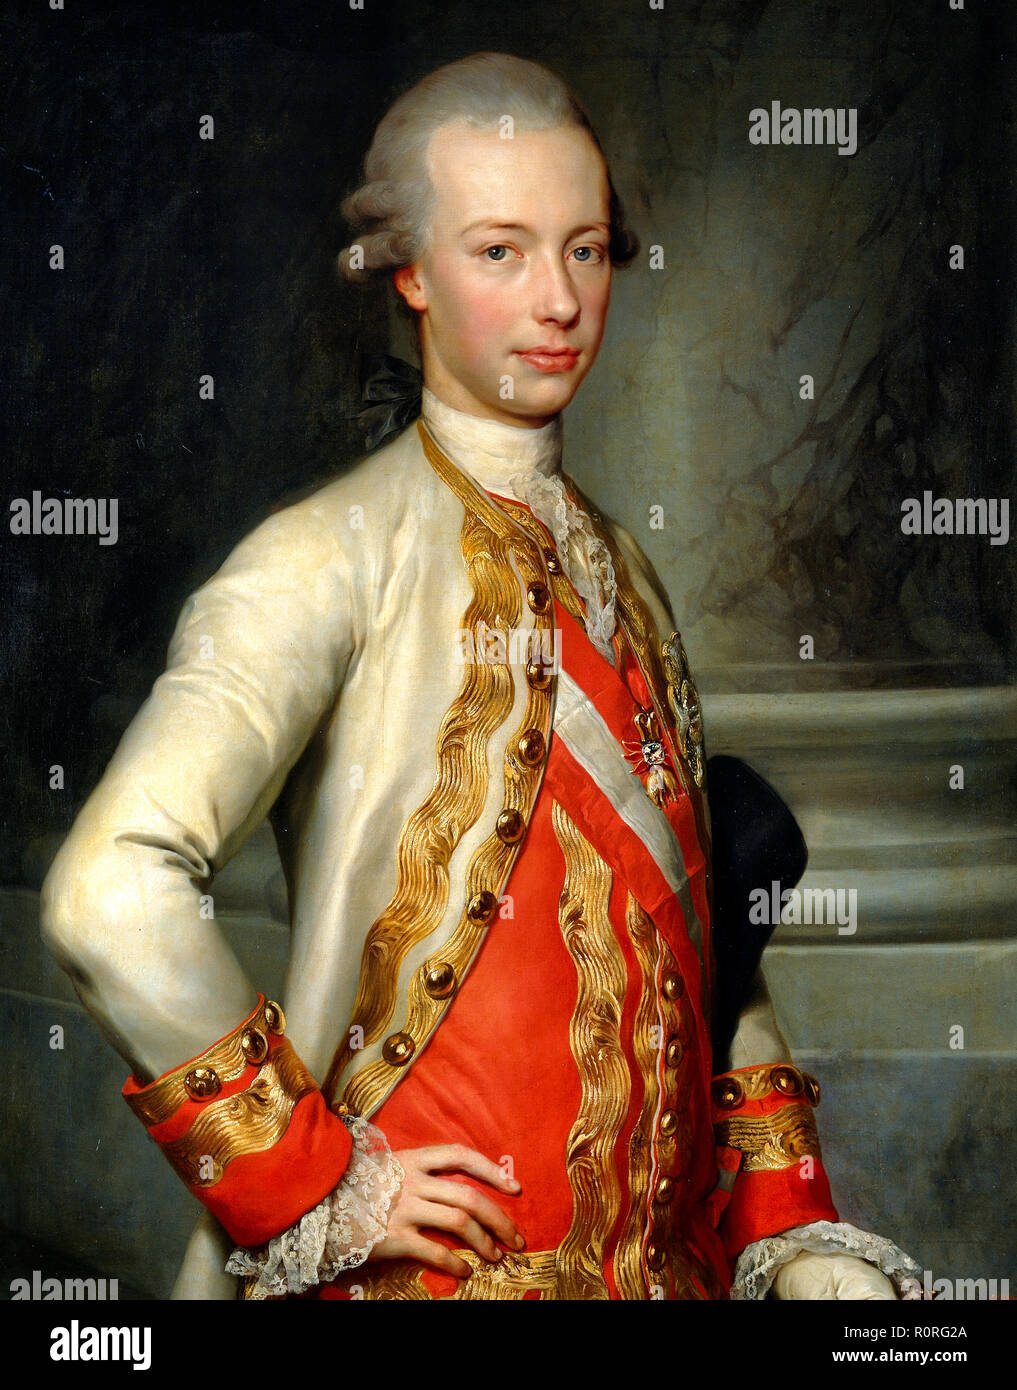 Portrait of Archduke Leopold of Lorraine (1747-1792), who became Grand Duke of Tuscany and later Emperor of the Holy Roman Empire. Pompeo Batoni, circa 1769 Stock Photo